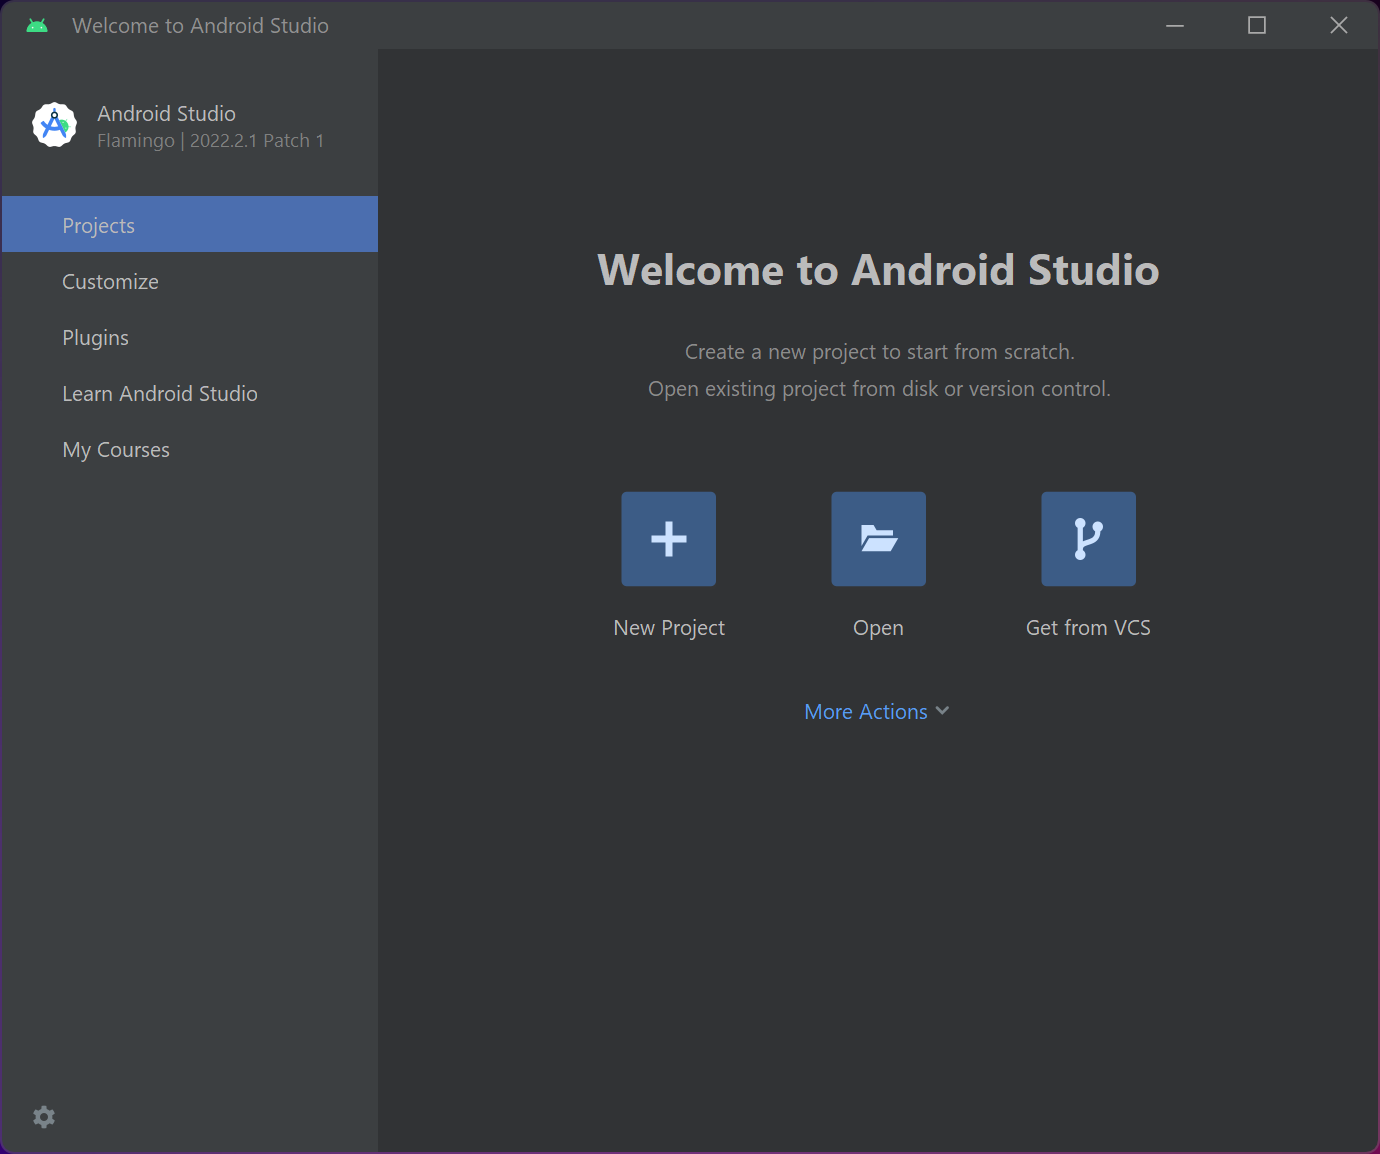 Android studio basics - Hyperskill — Learn programming, create apps